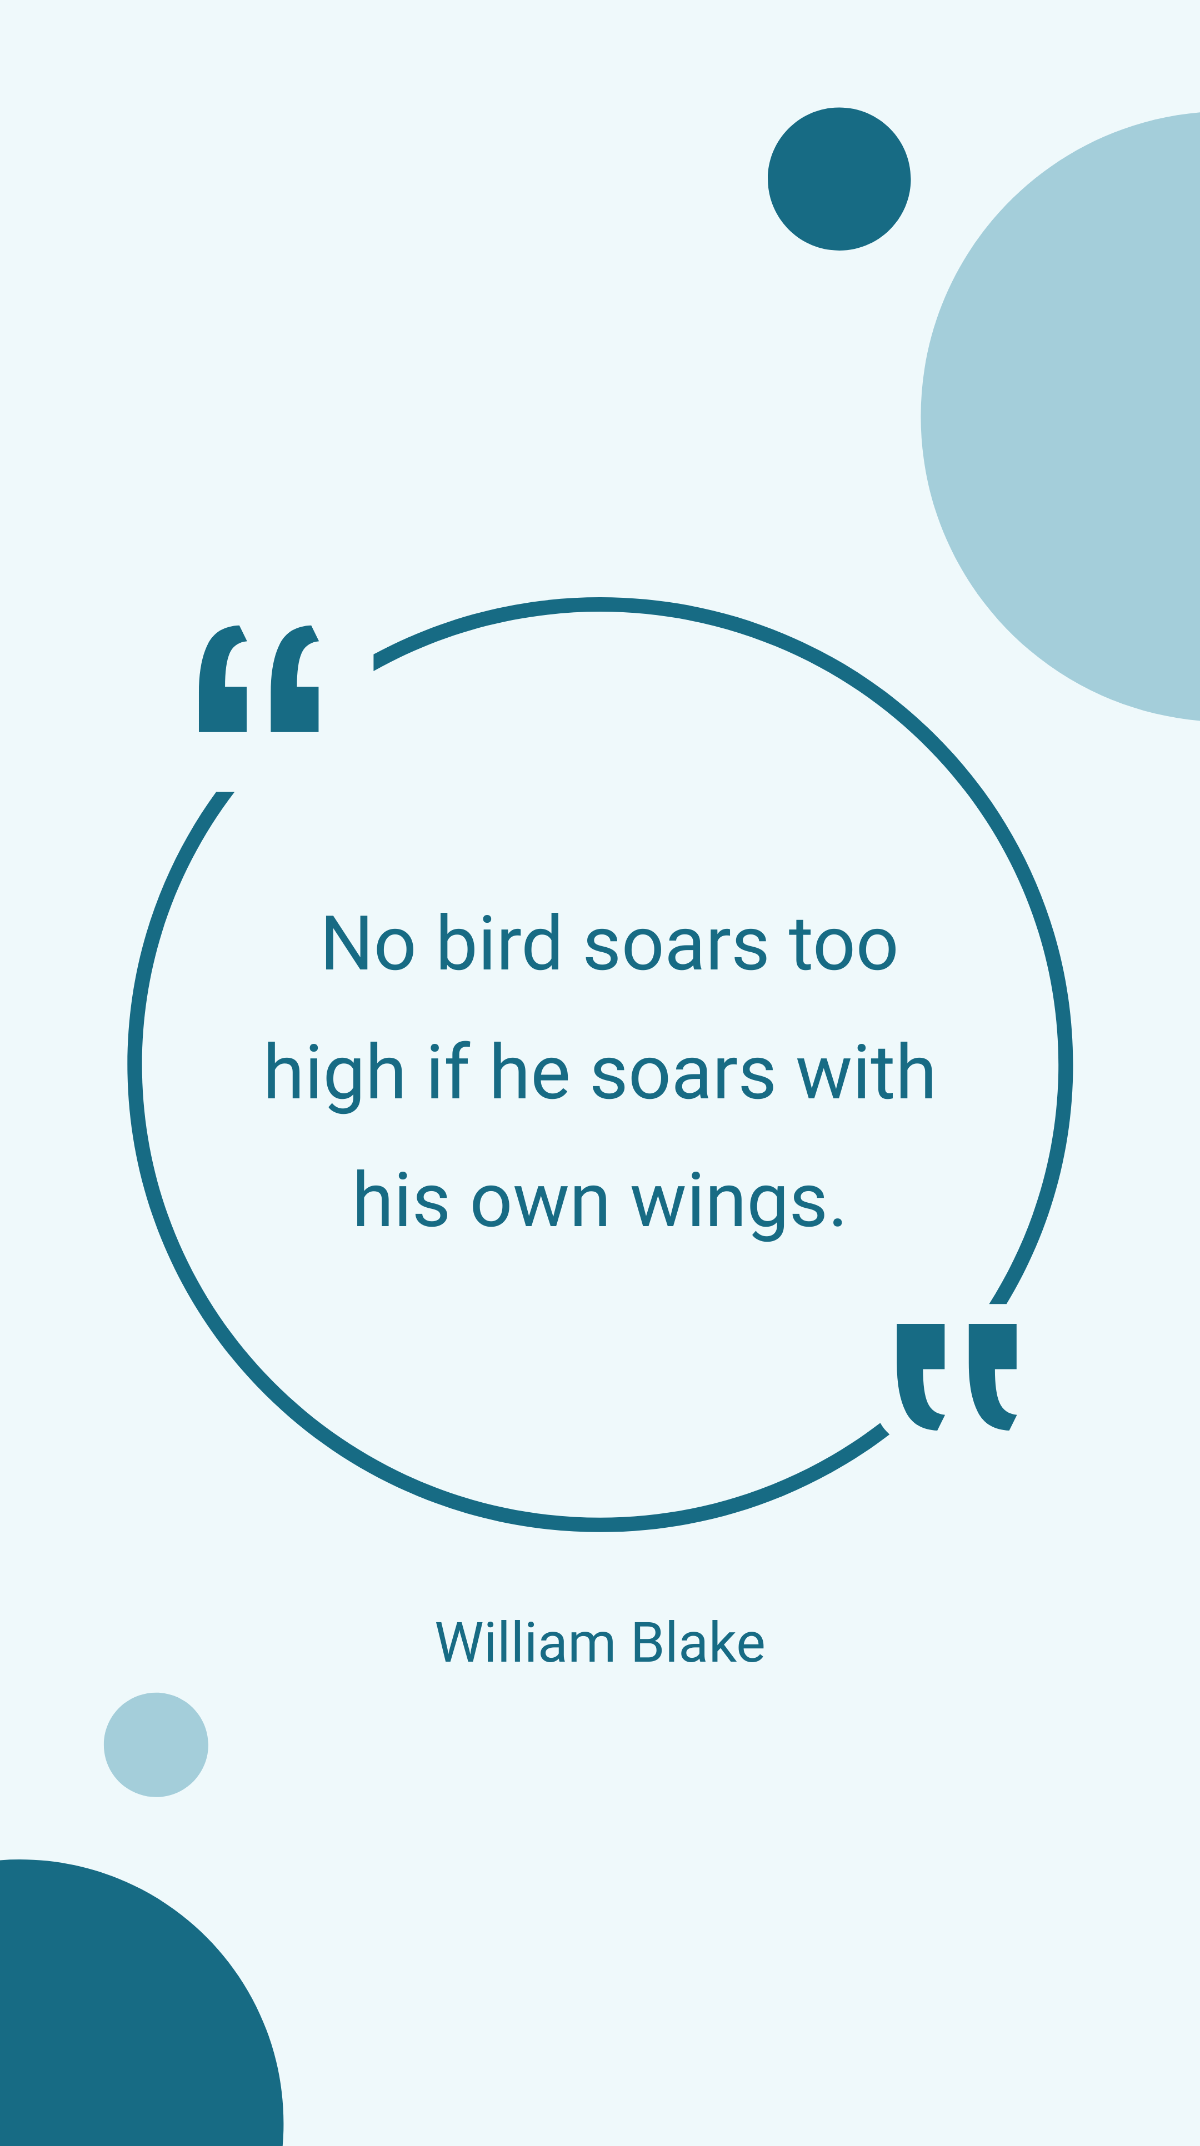 William Blake - No bird soars too high if he soars with his own wings. Template